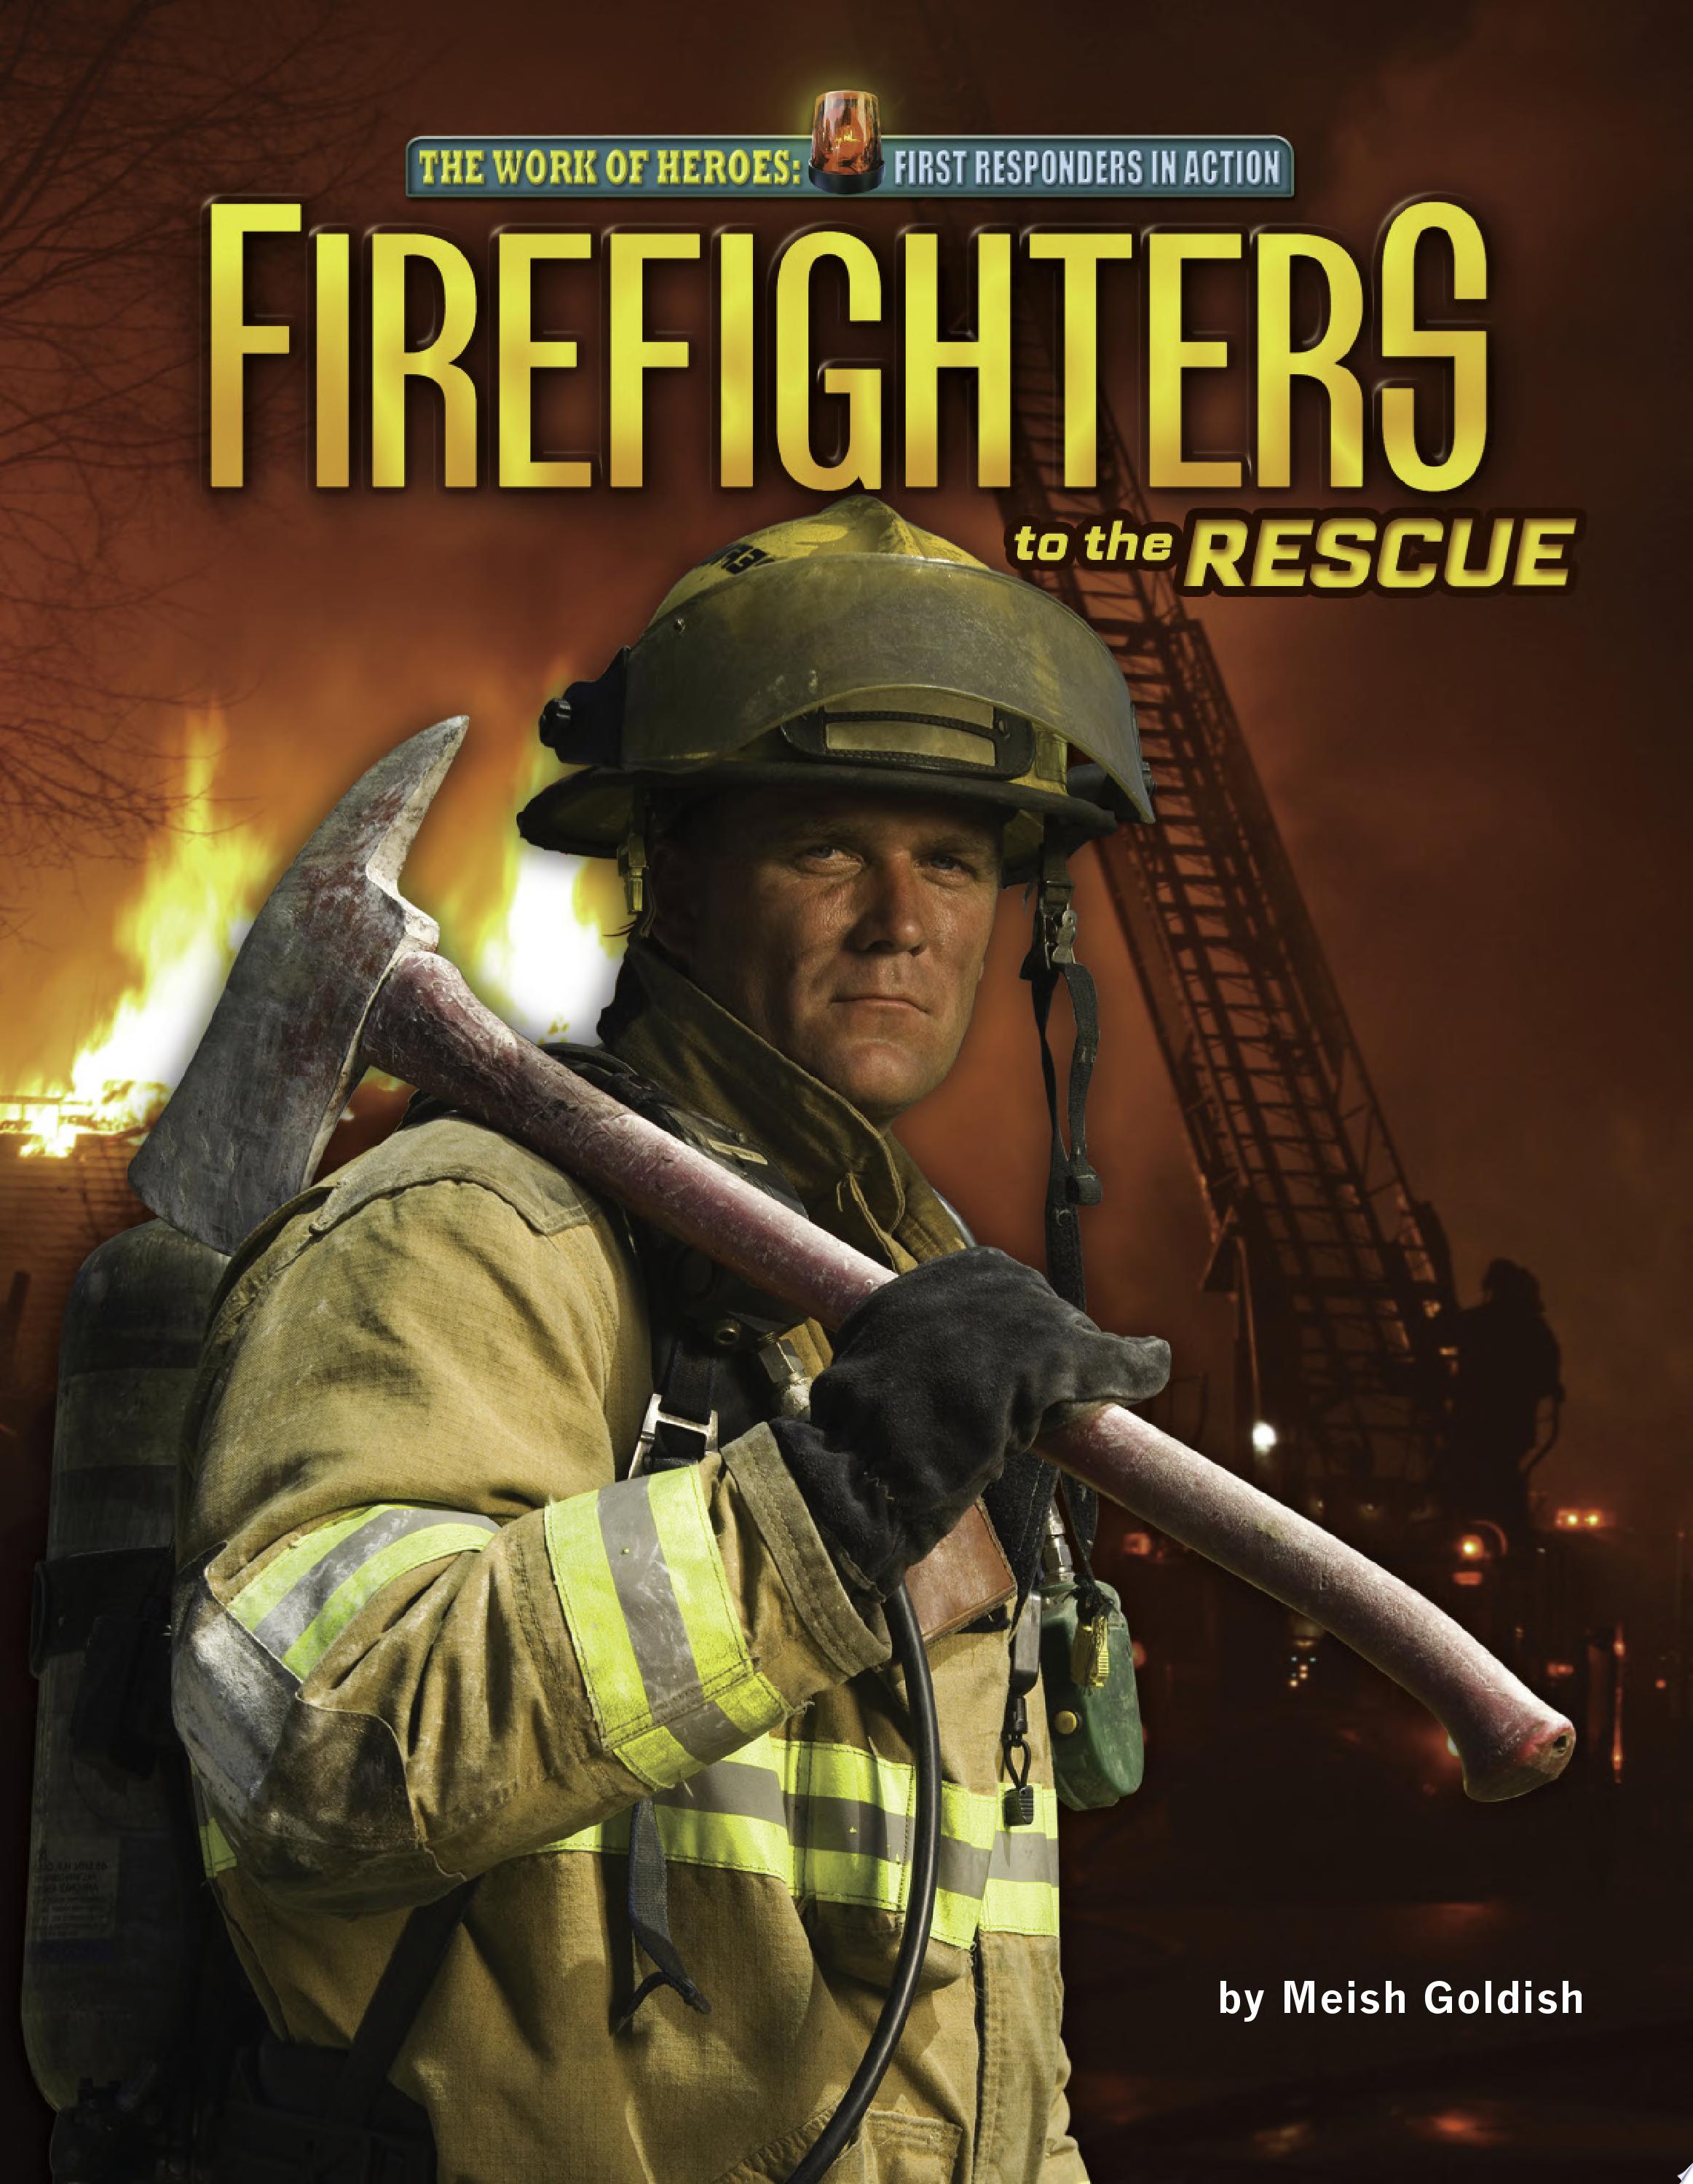 Image for "Firefighters to the Rescue"